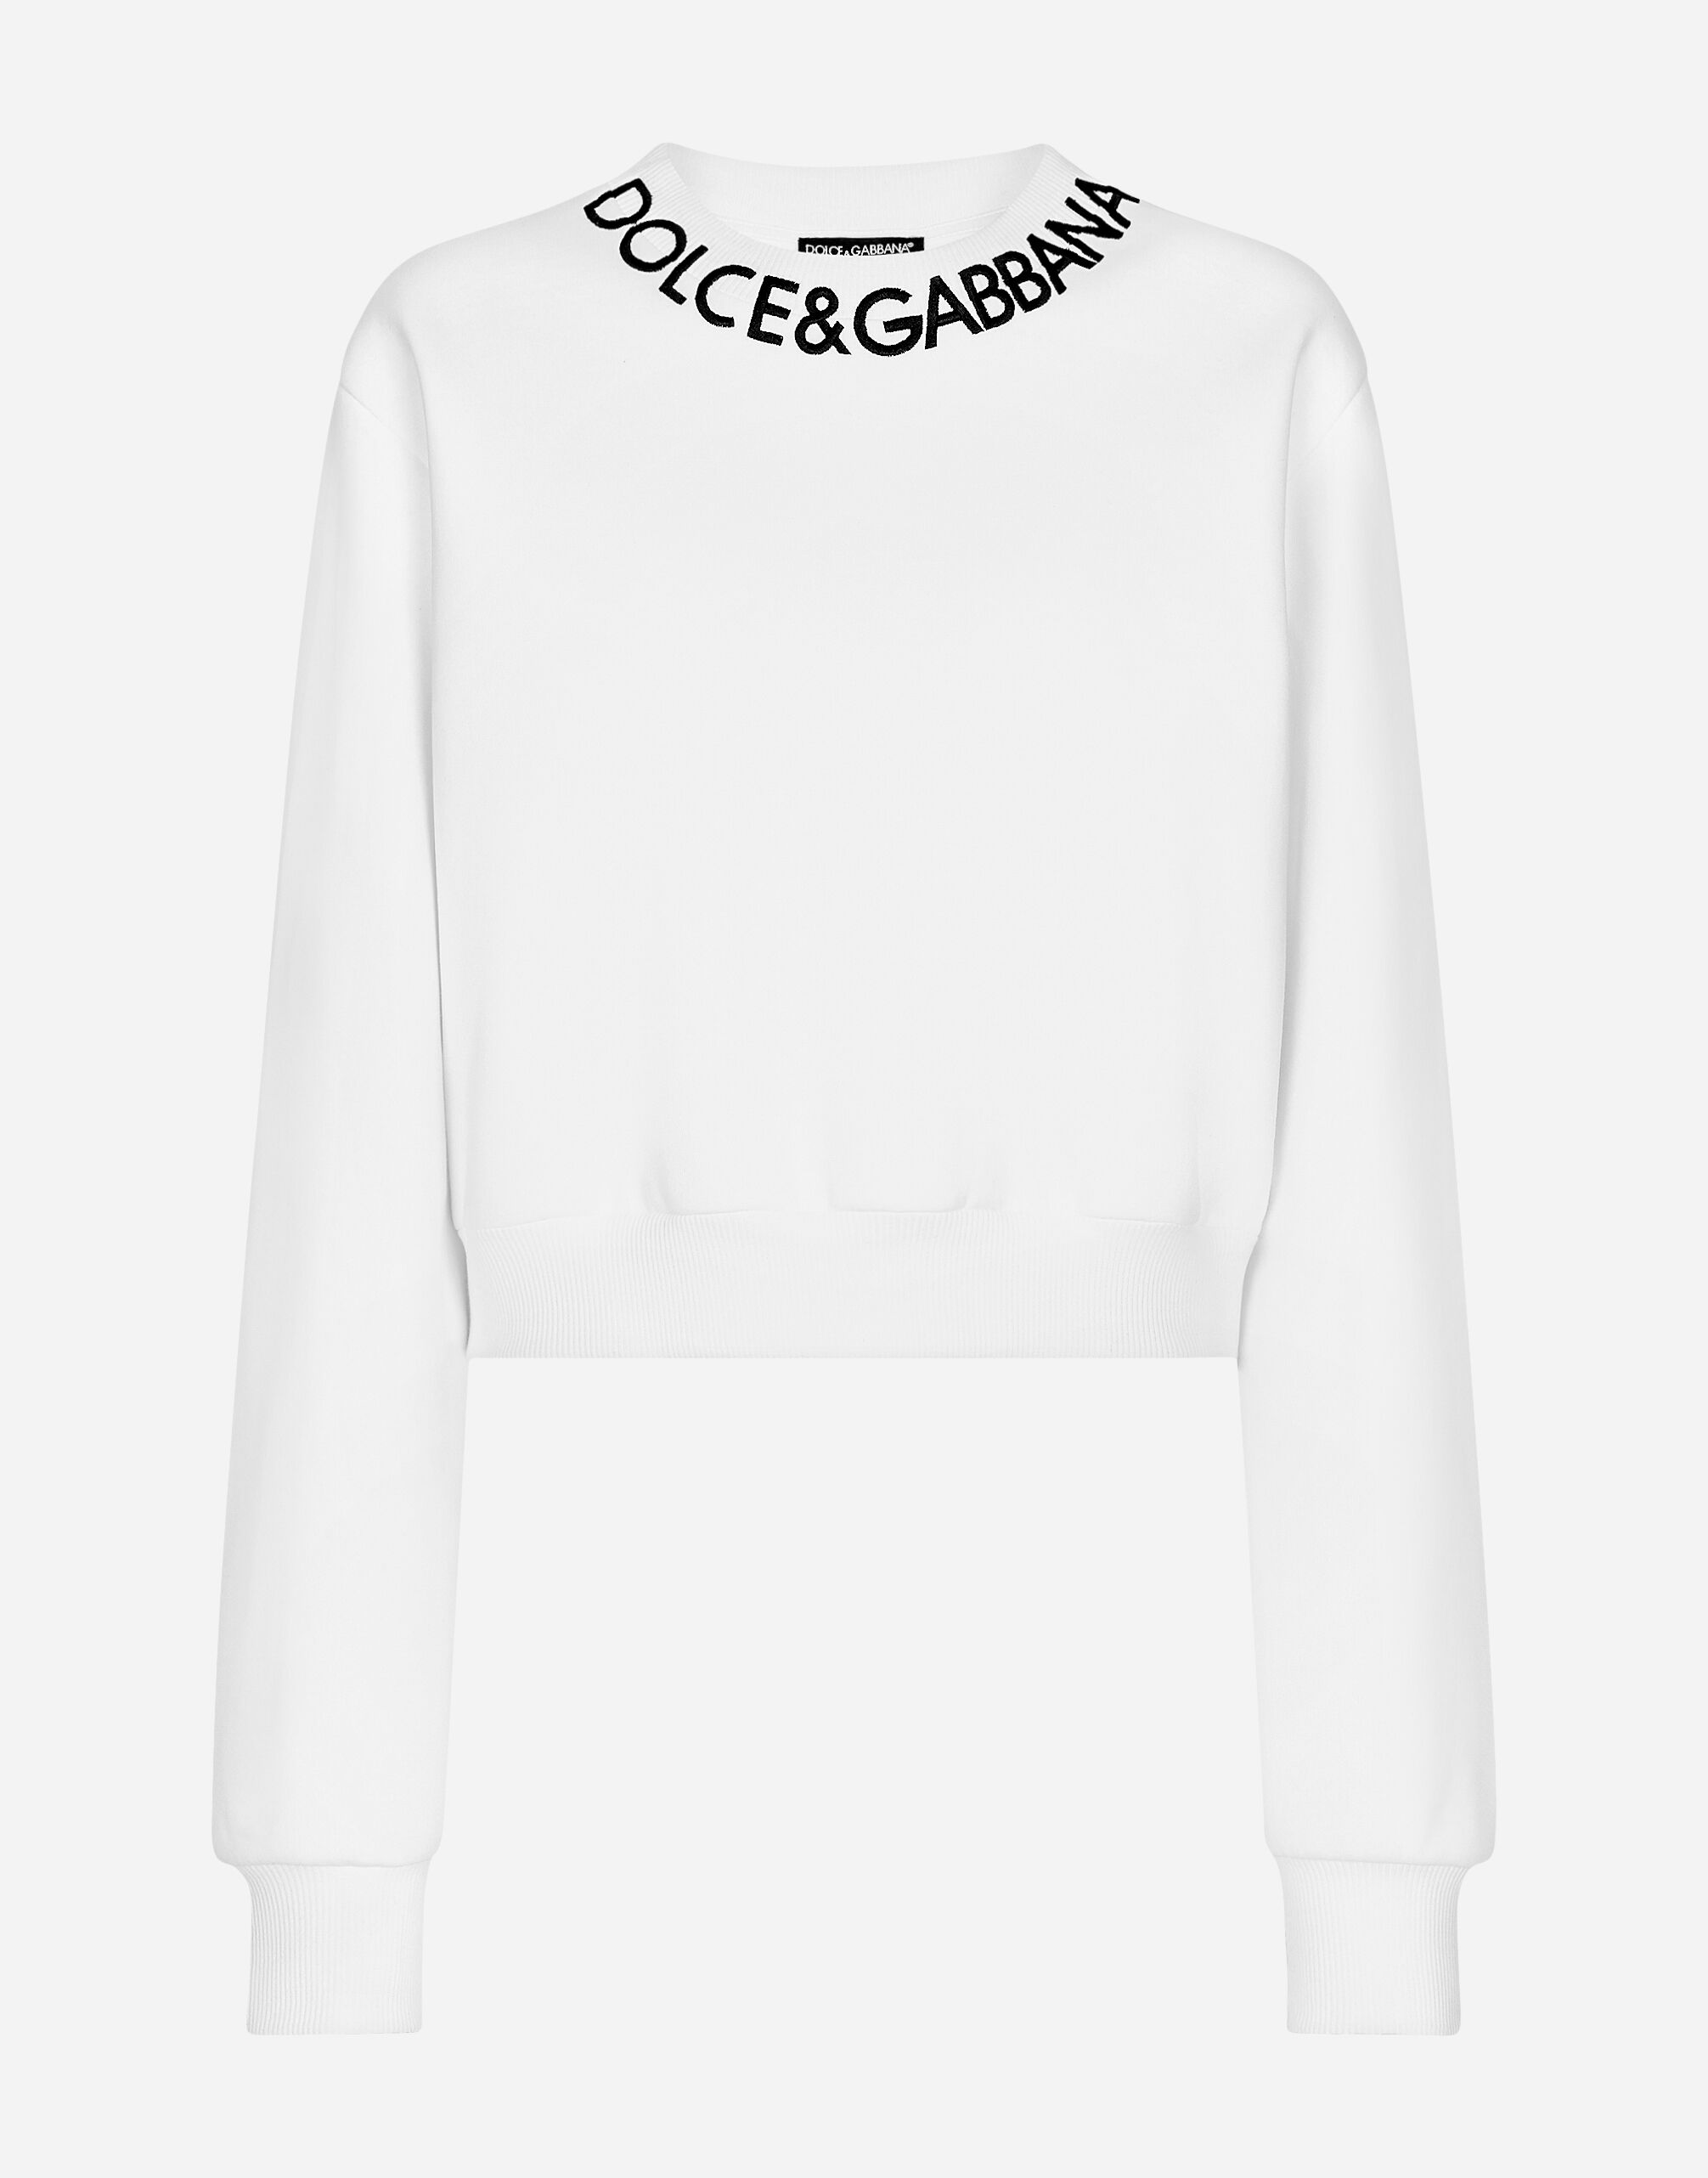 Dolce & Gabbana Cropped jersey sweatshirt with logo embroidery on neck Gold BB7287AY828